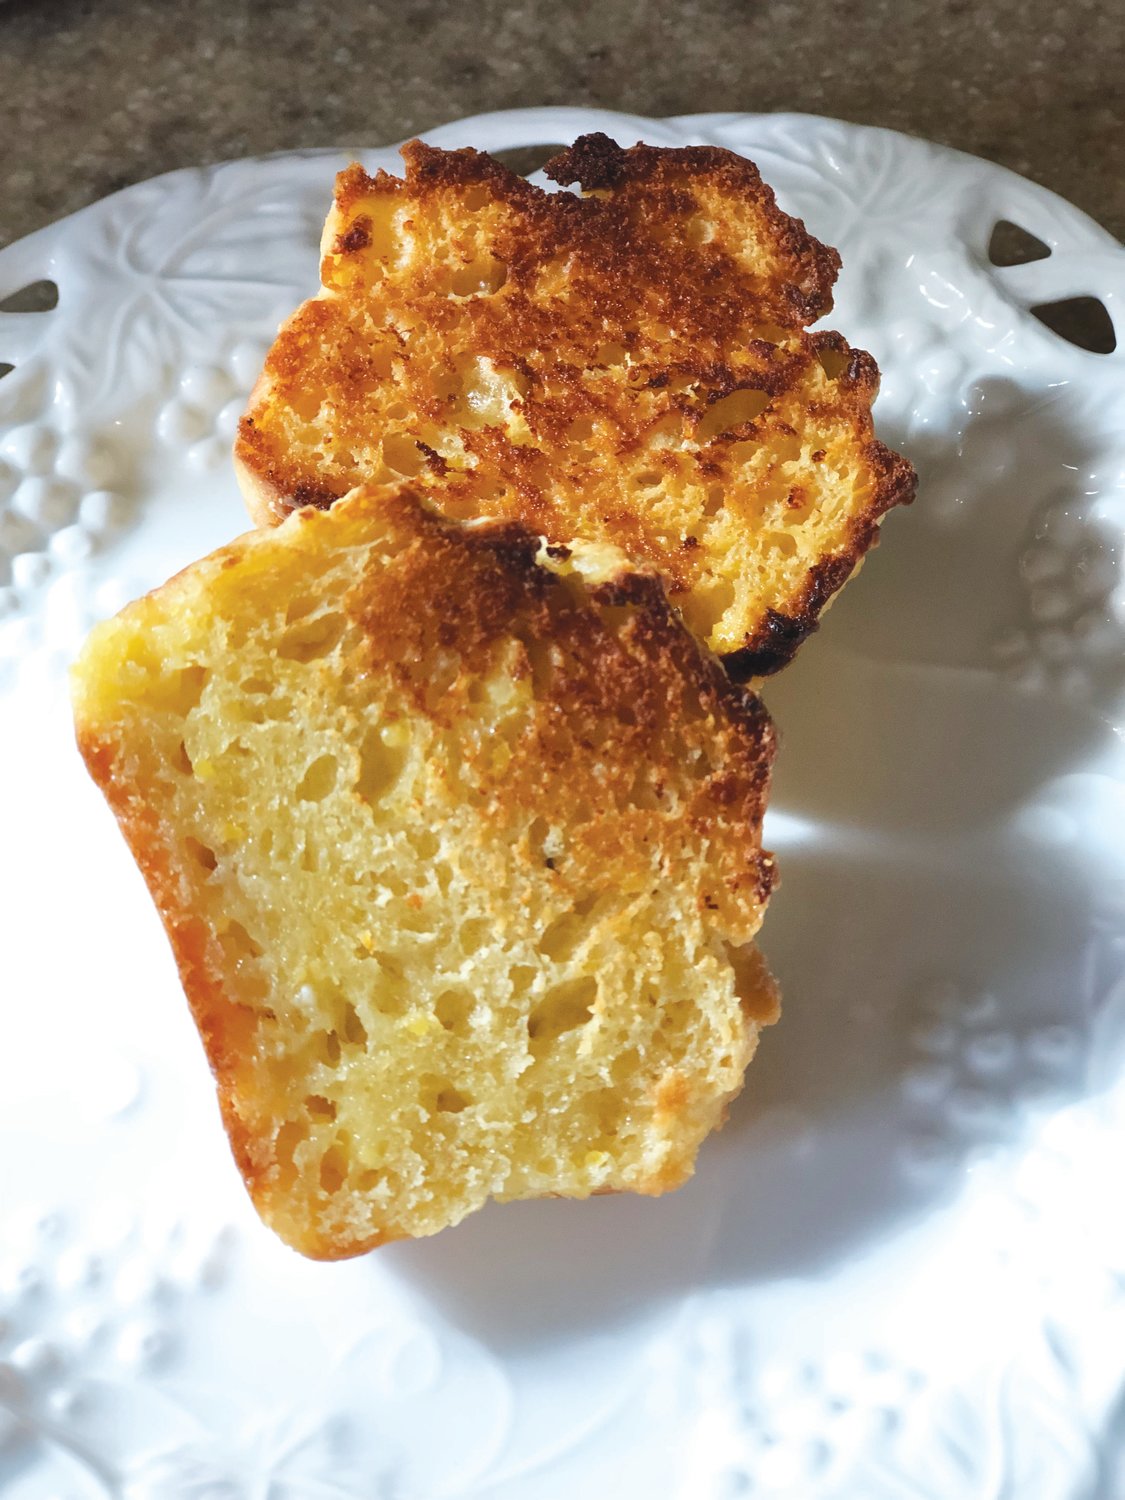 Polenta Corn Muffins are especially tasty when split and griddled with butter until toasty.